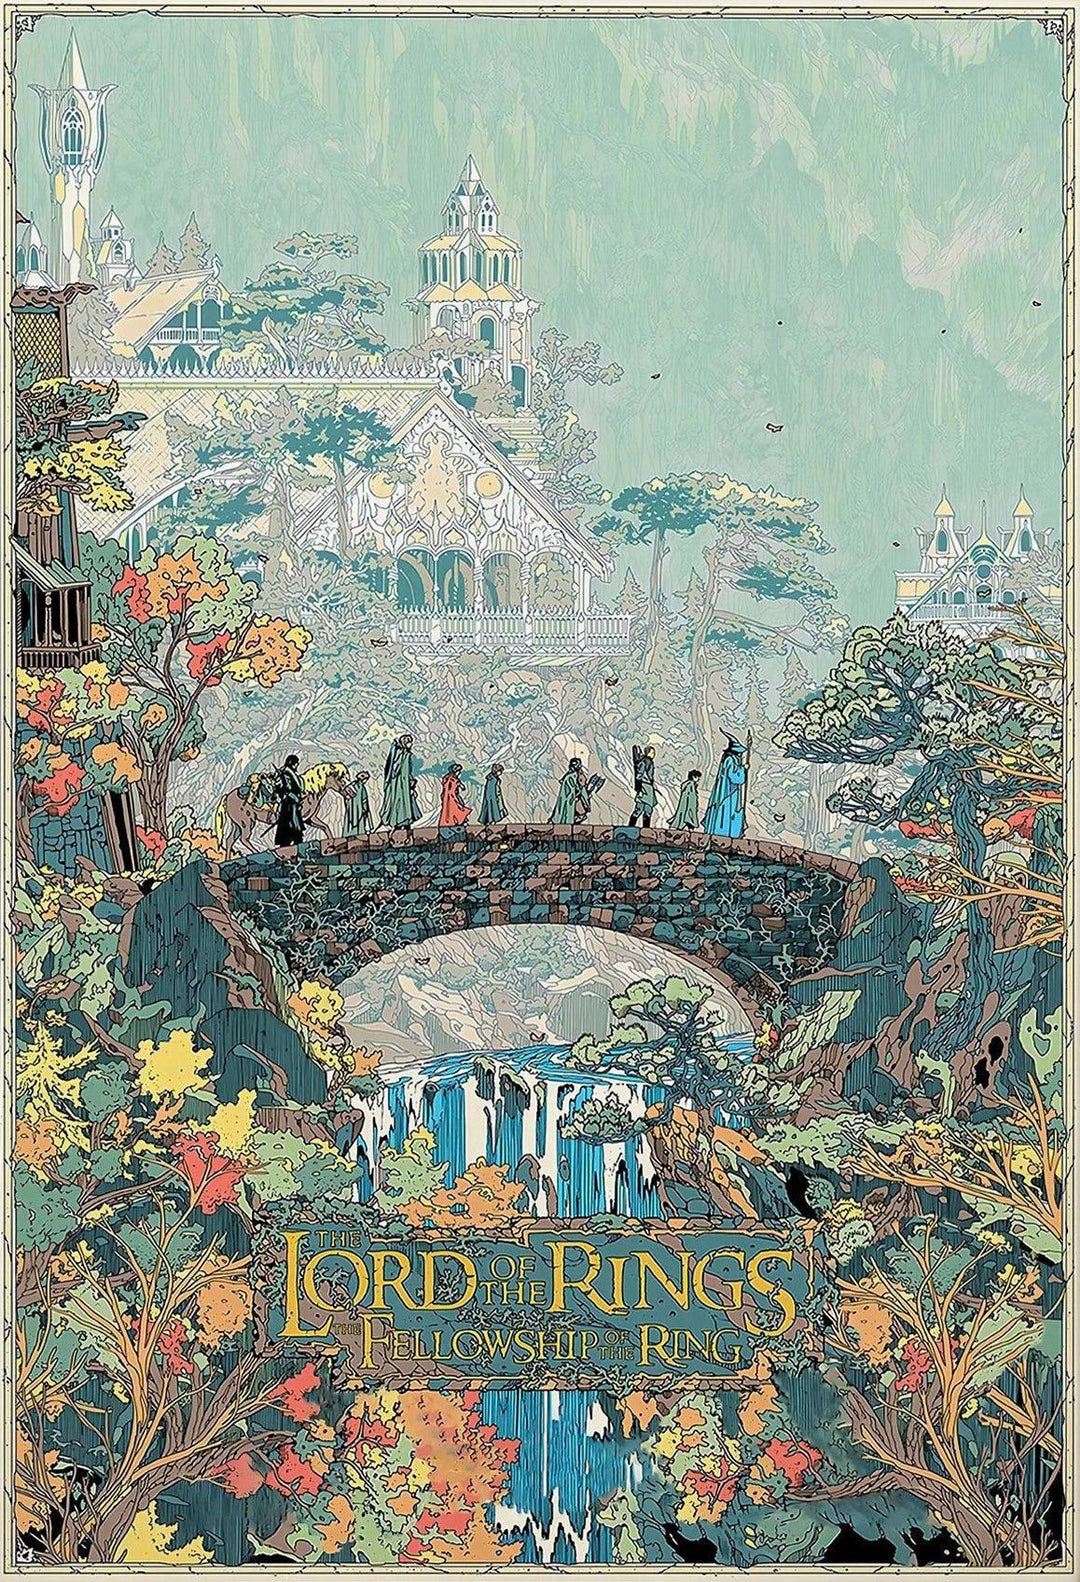 The Lord of The Rings Movie Poster - Colorful Magic Wall Art - Home Decor - Brand My Case